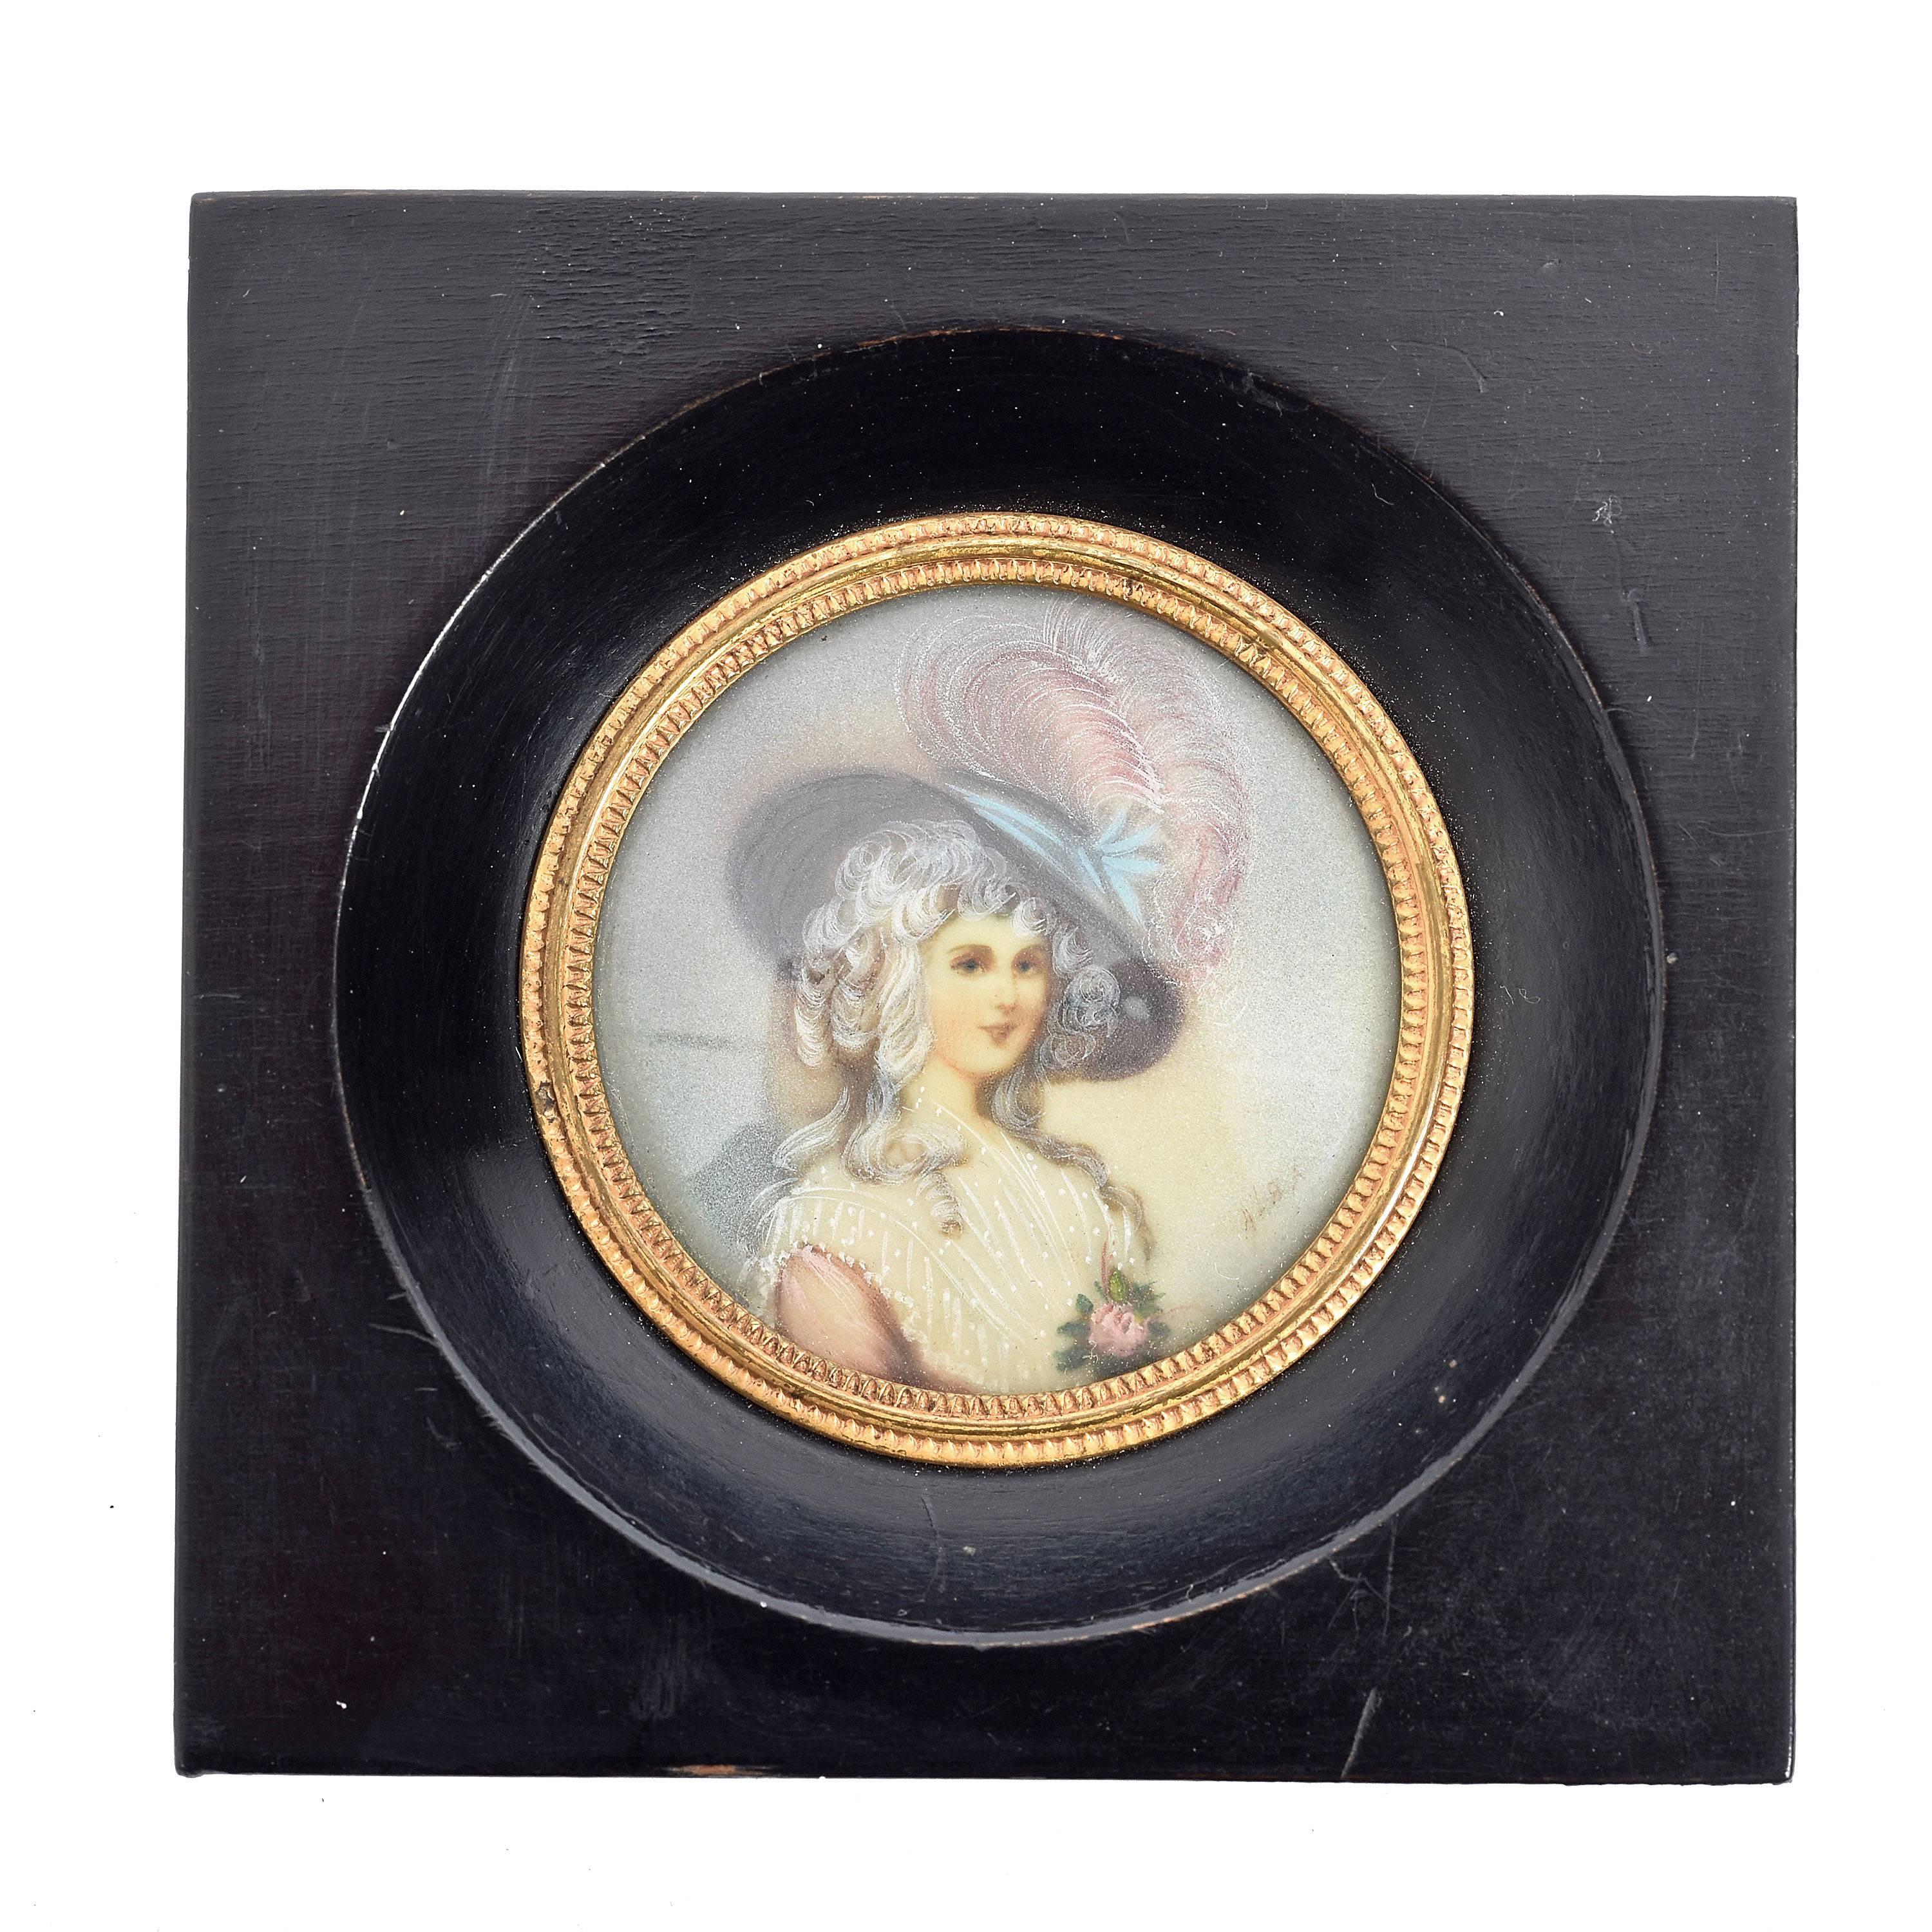 Three ancient miniatures signed of the 19th century, miniature paintings of noblewomen

Ebonized wooden frame measure 8 x 8 cm.